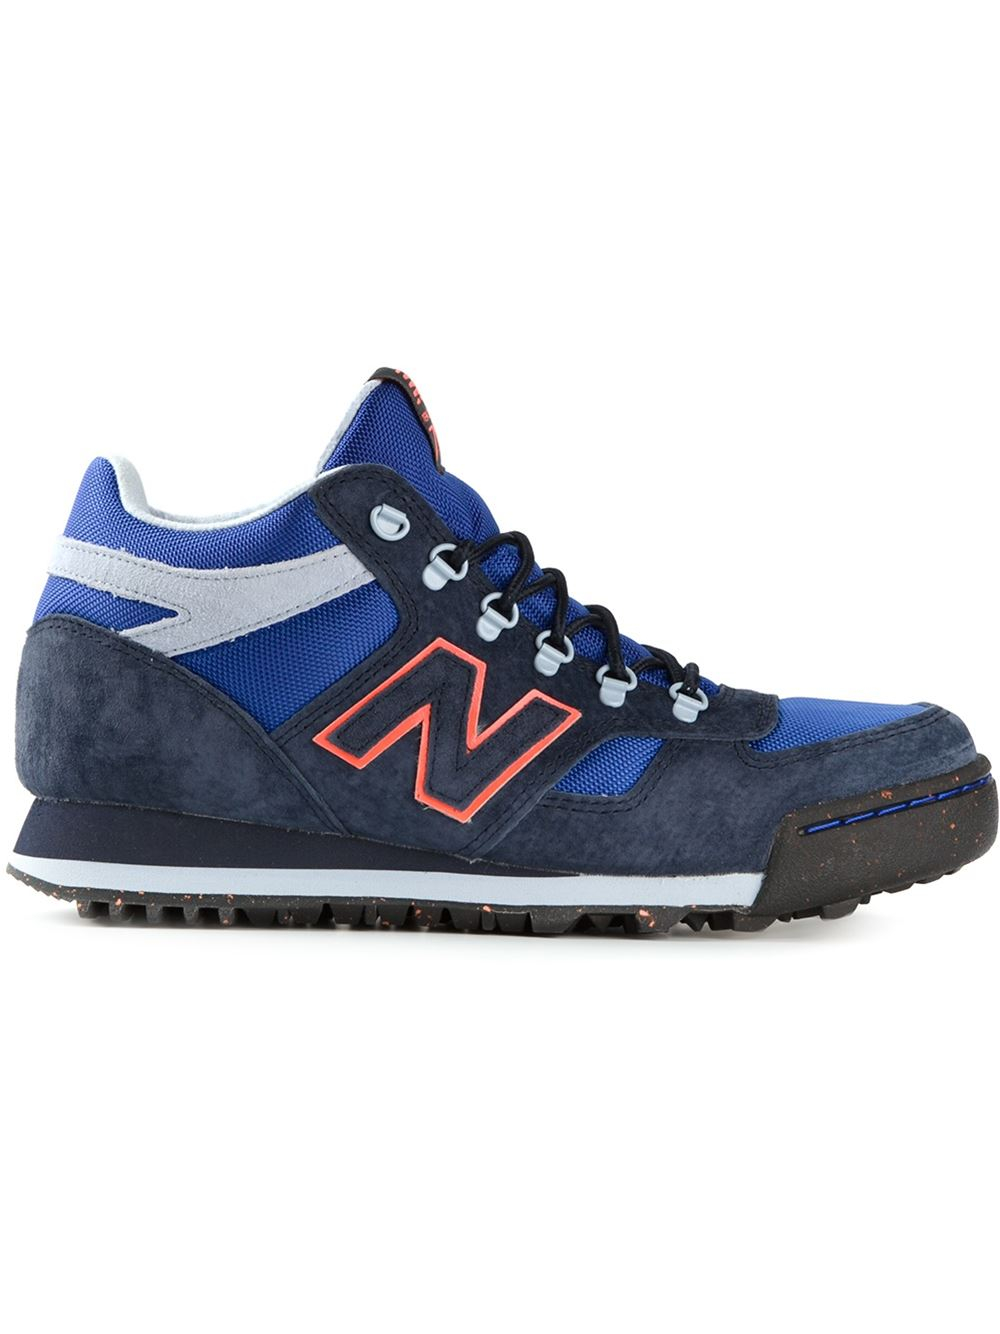 Lyst - New Balance 'H710' Hi-Top Sneakers in Blue for Men